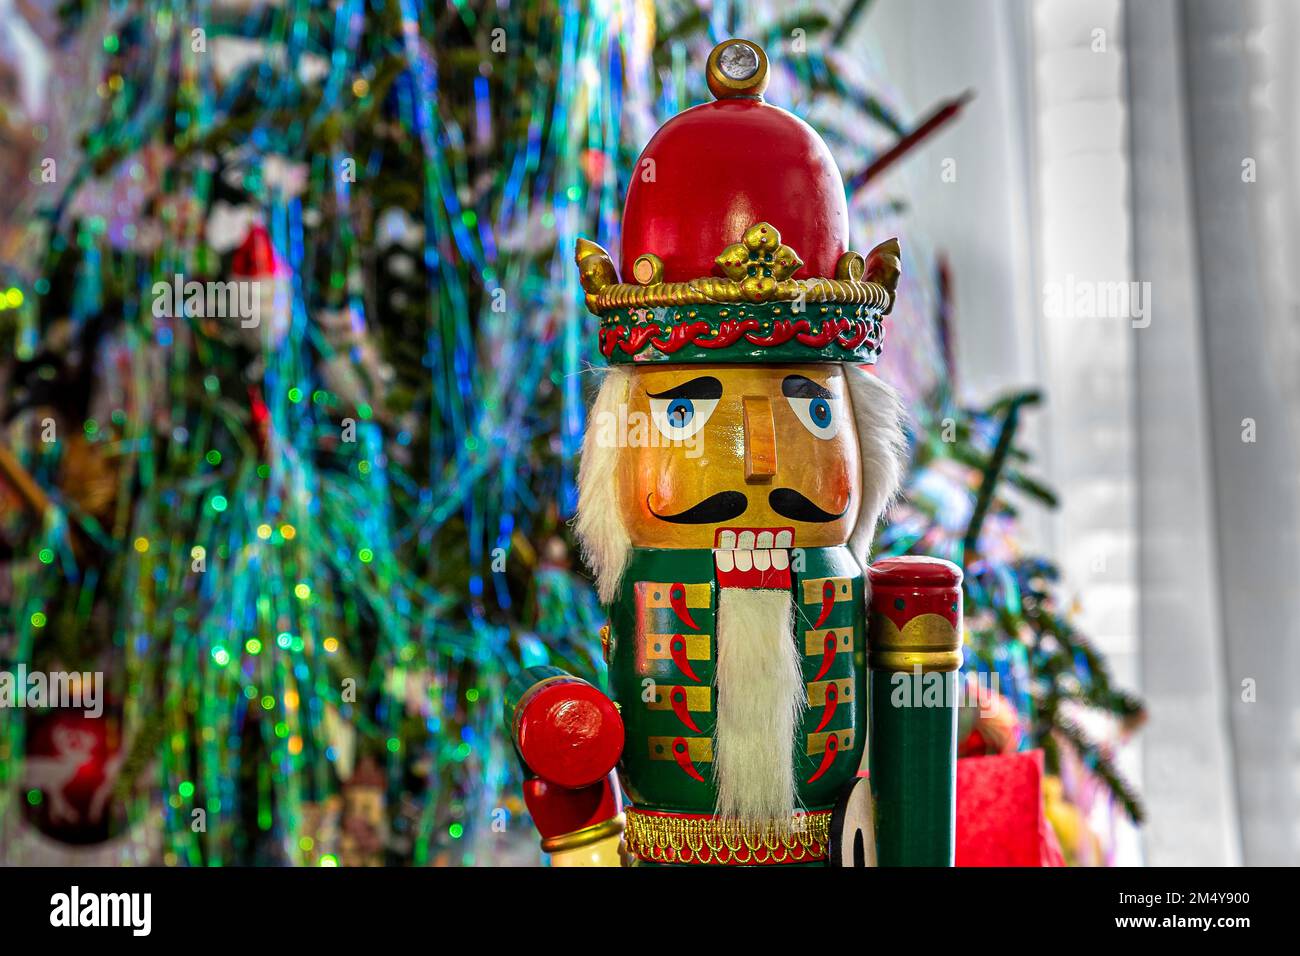 Nutcracker standing wooden soldier, iconic nutcracker. Standing against the background of a Christmas tree. Stock Photo